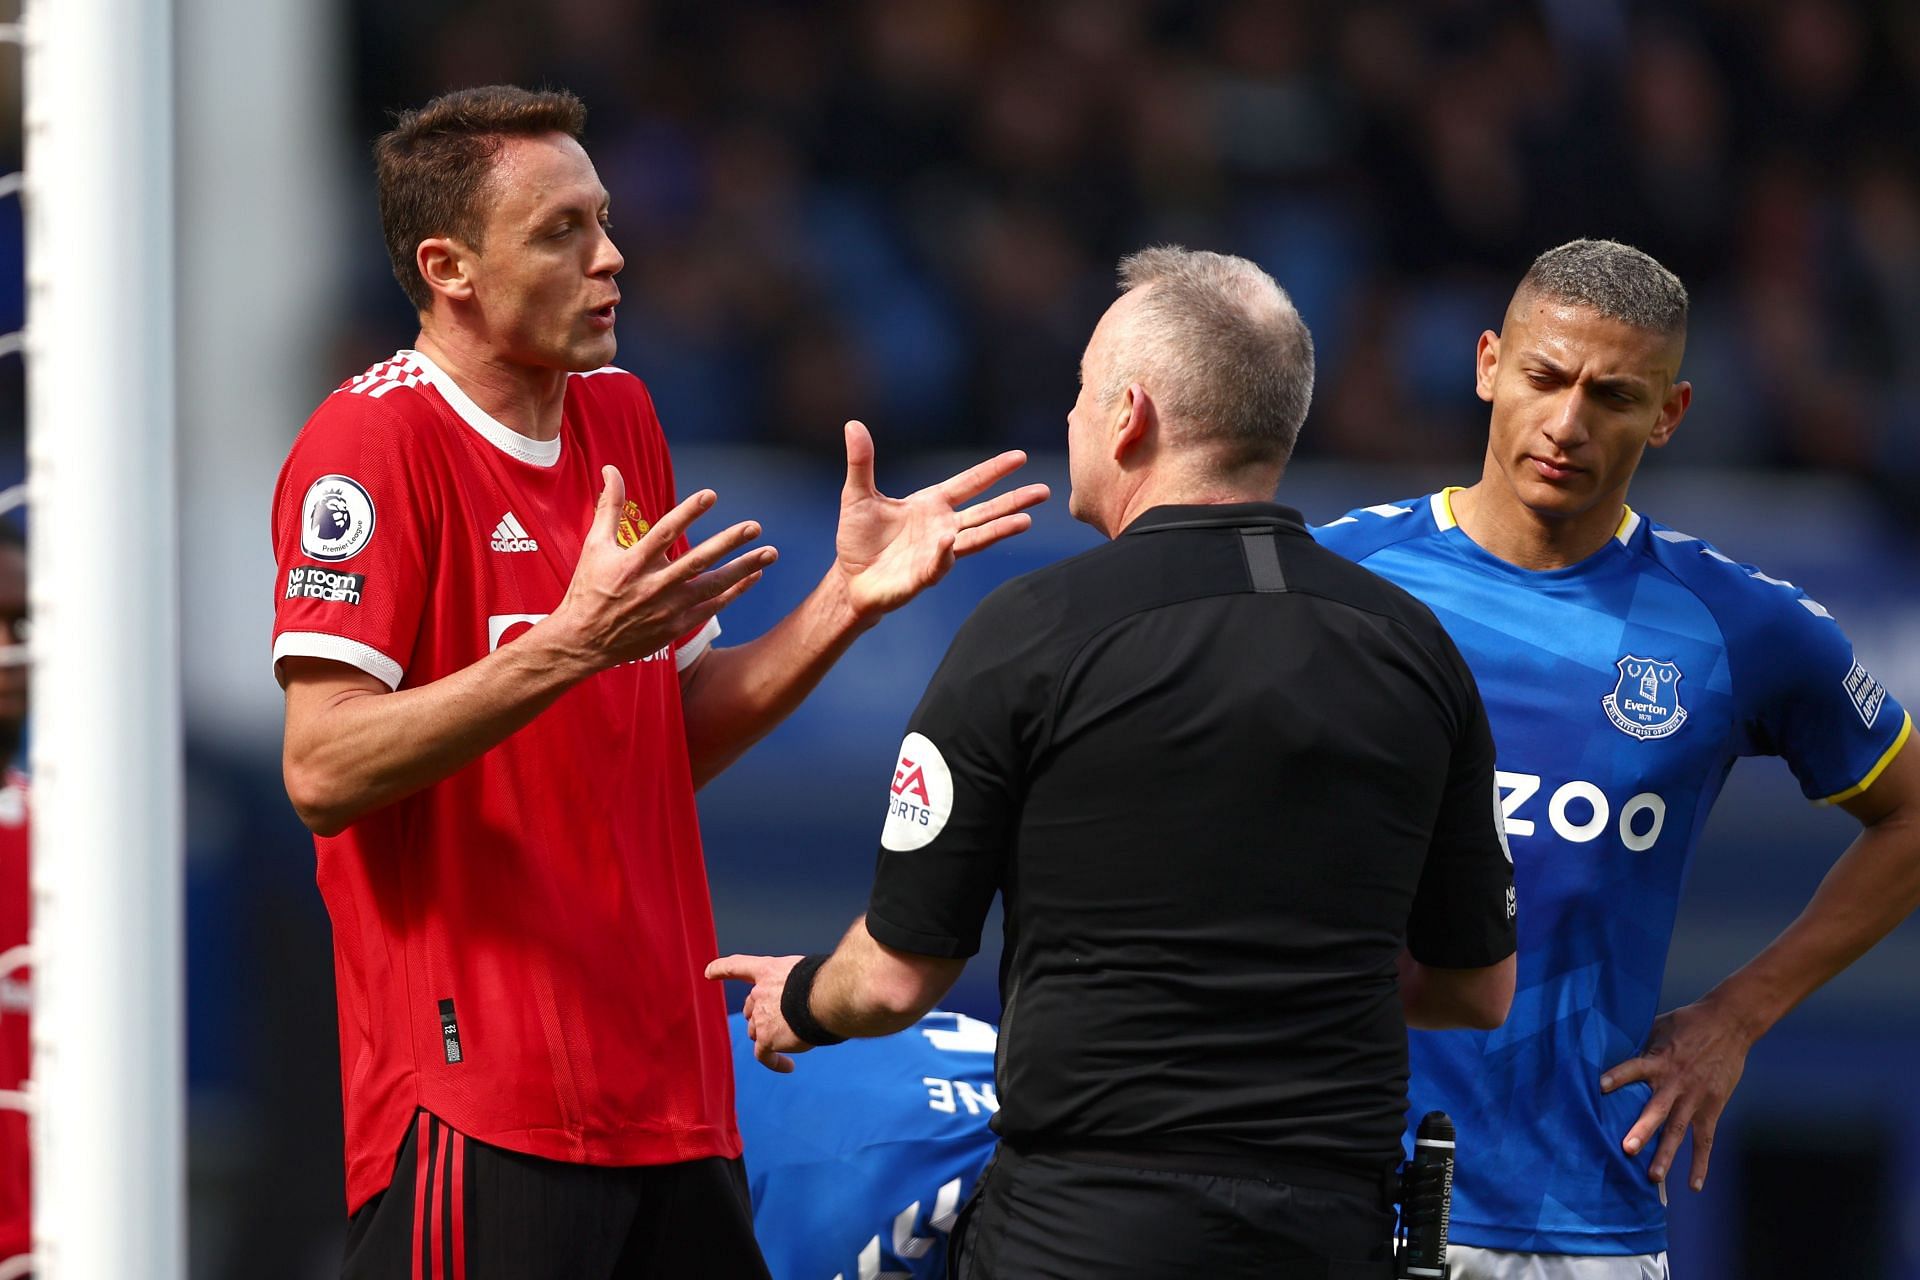 Nemanja Matic has failed to nail down a regular place in the starting XI this season.